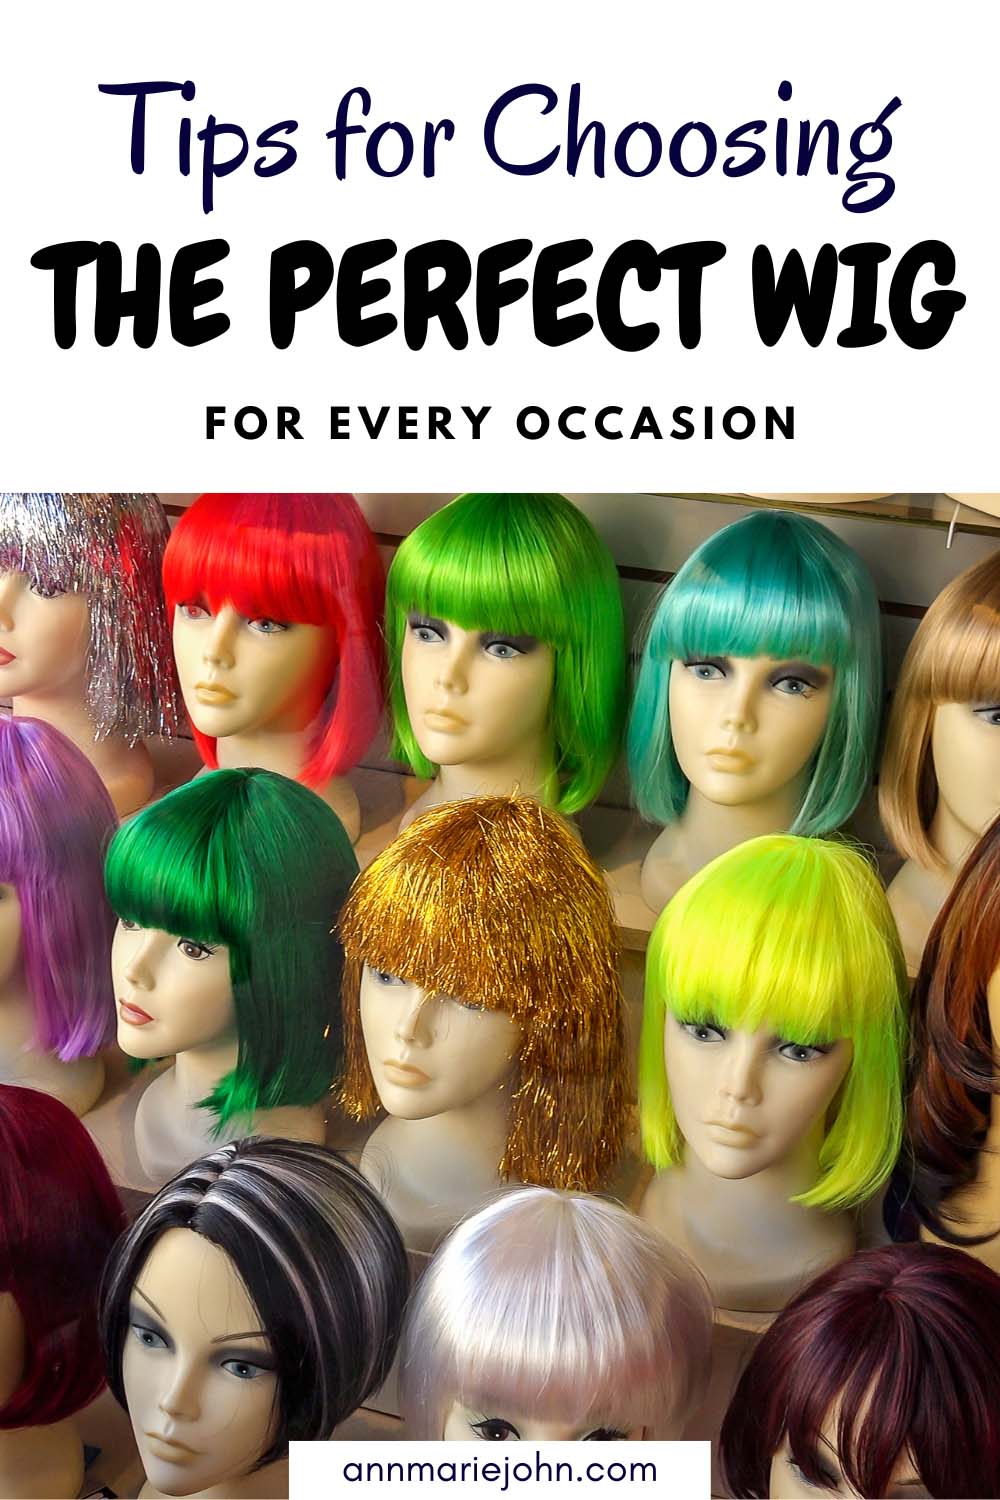 Tips for Choosing the Perfect Wig for Every Occasion